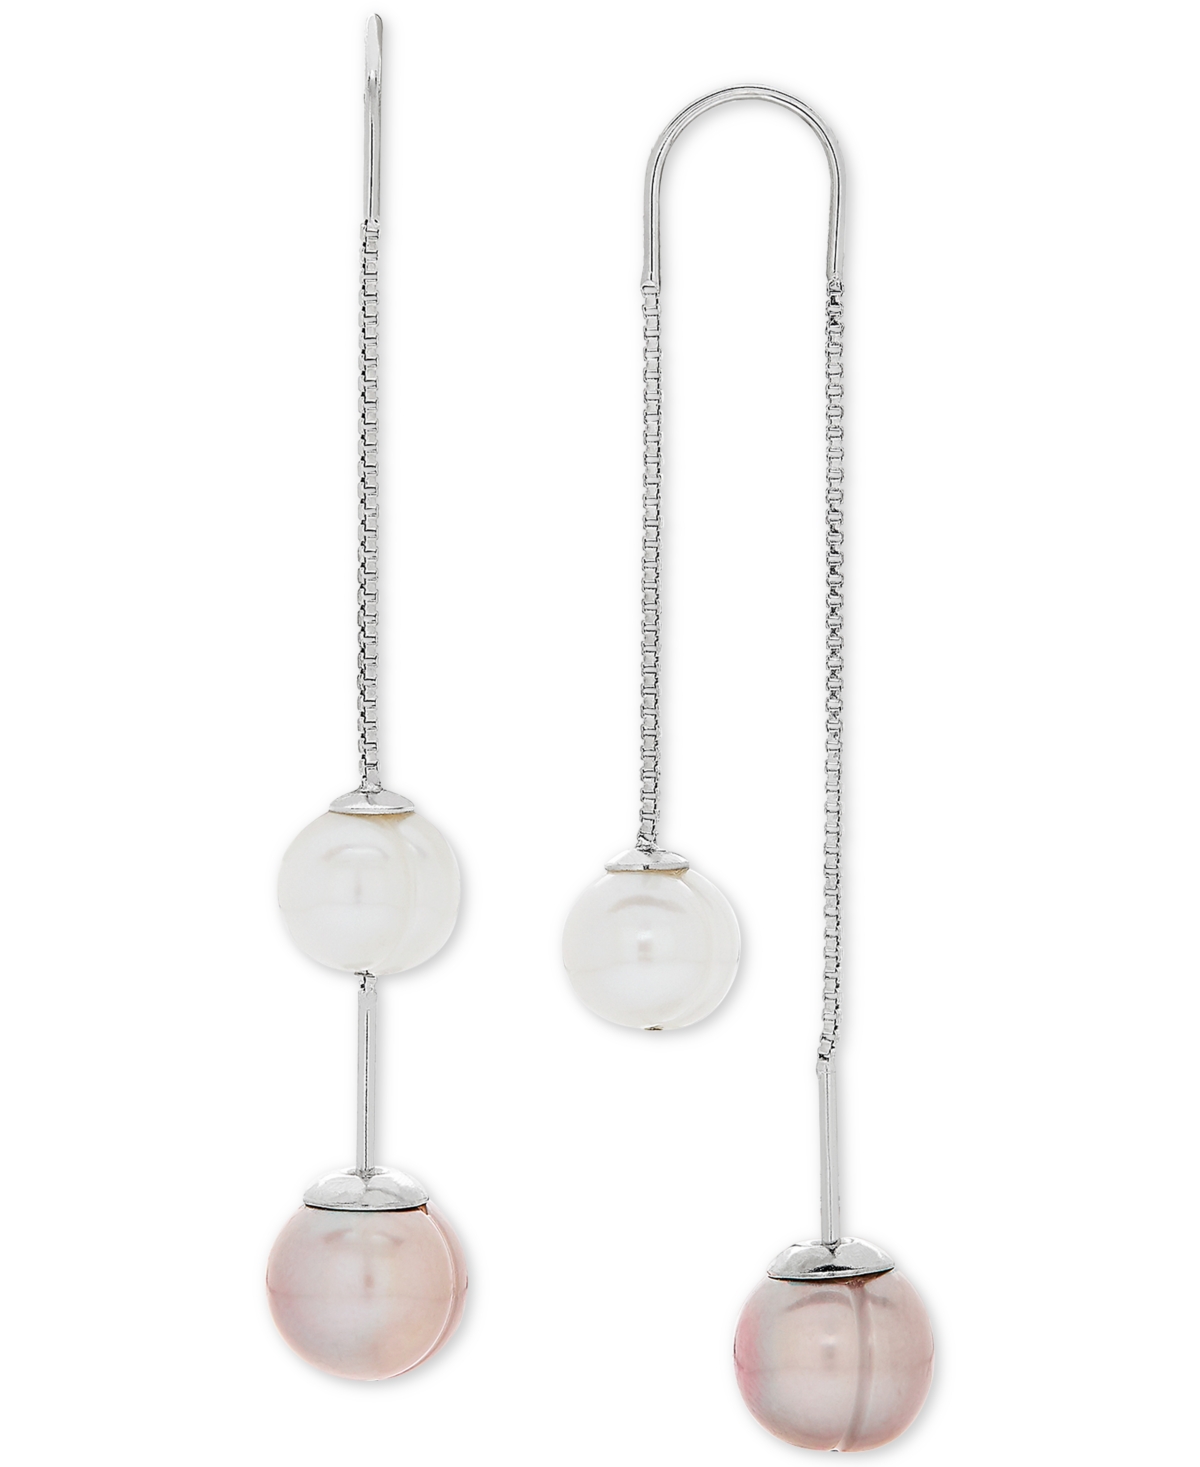 Arabella Gray and White Cultured Freshwater Pearl (8mm) Threader Earrings in Sterling Silver (Also Available in Blush and White)